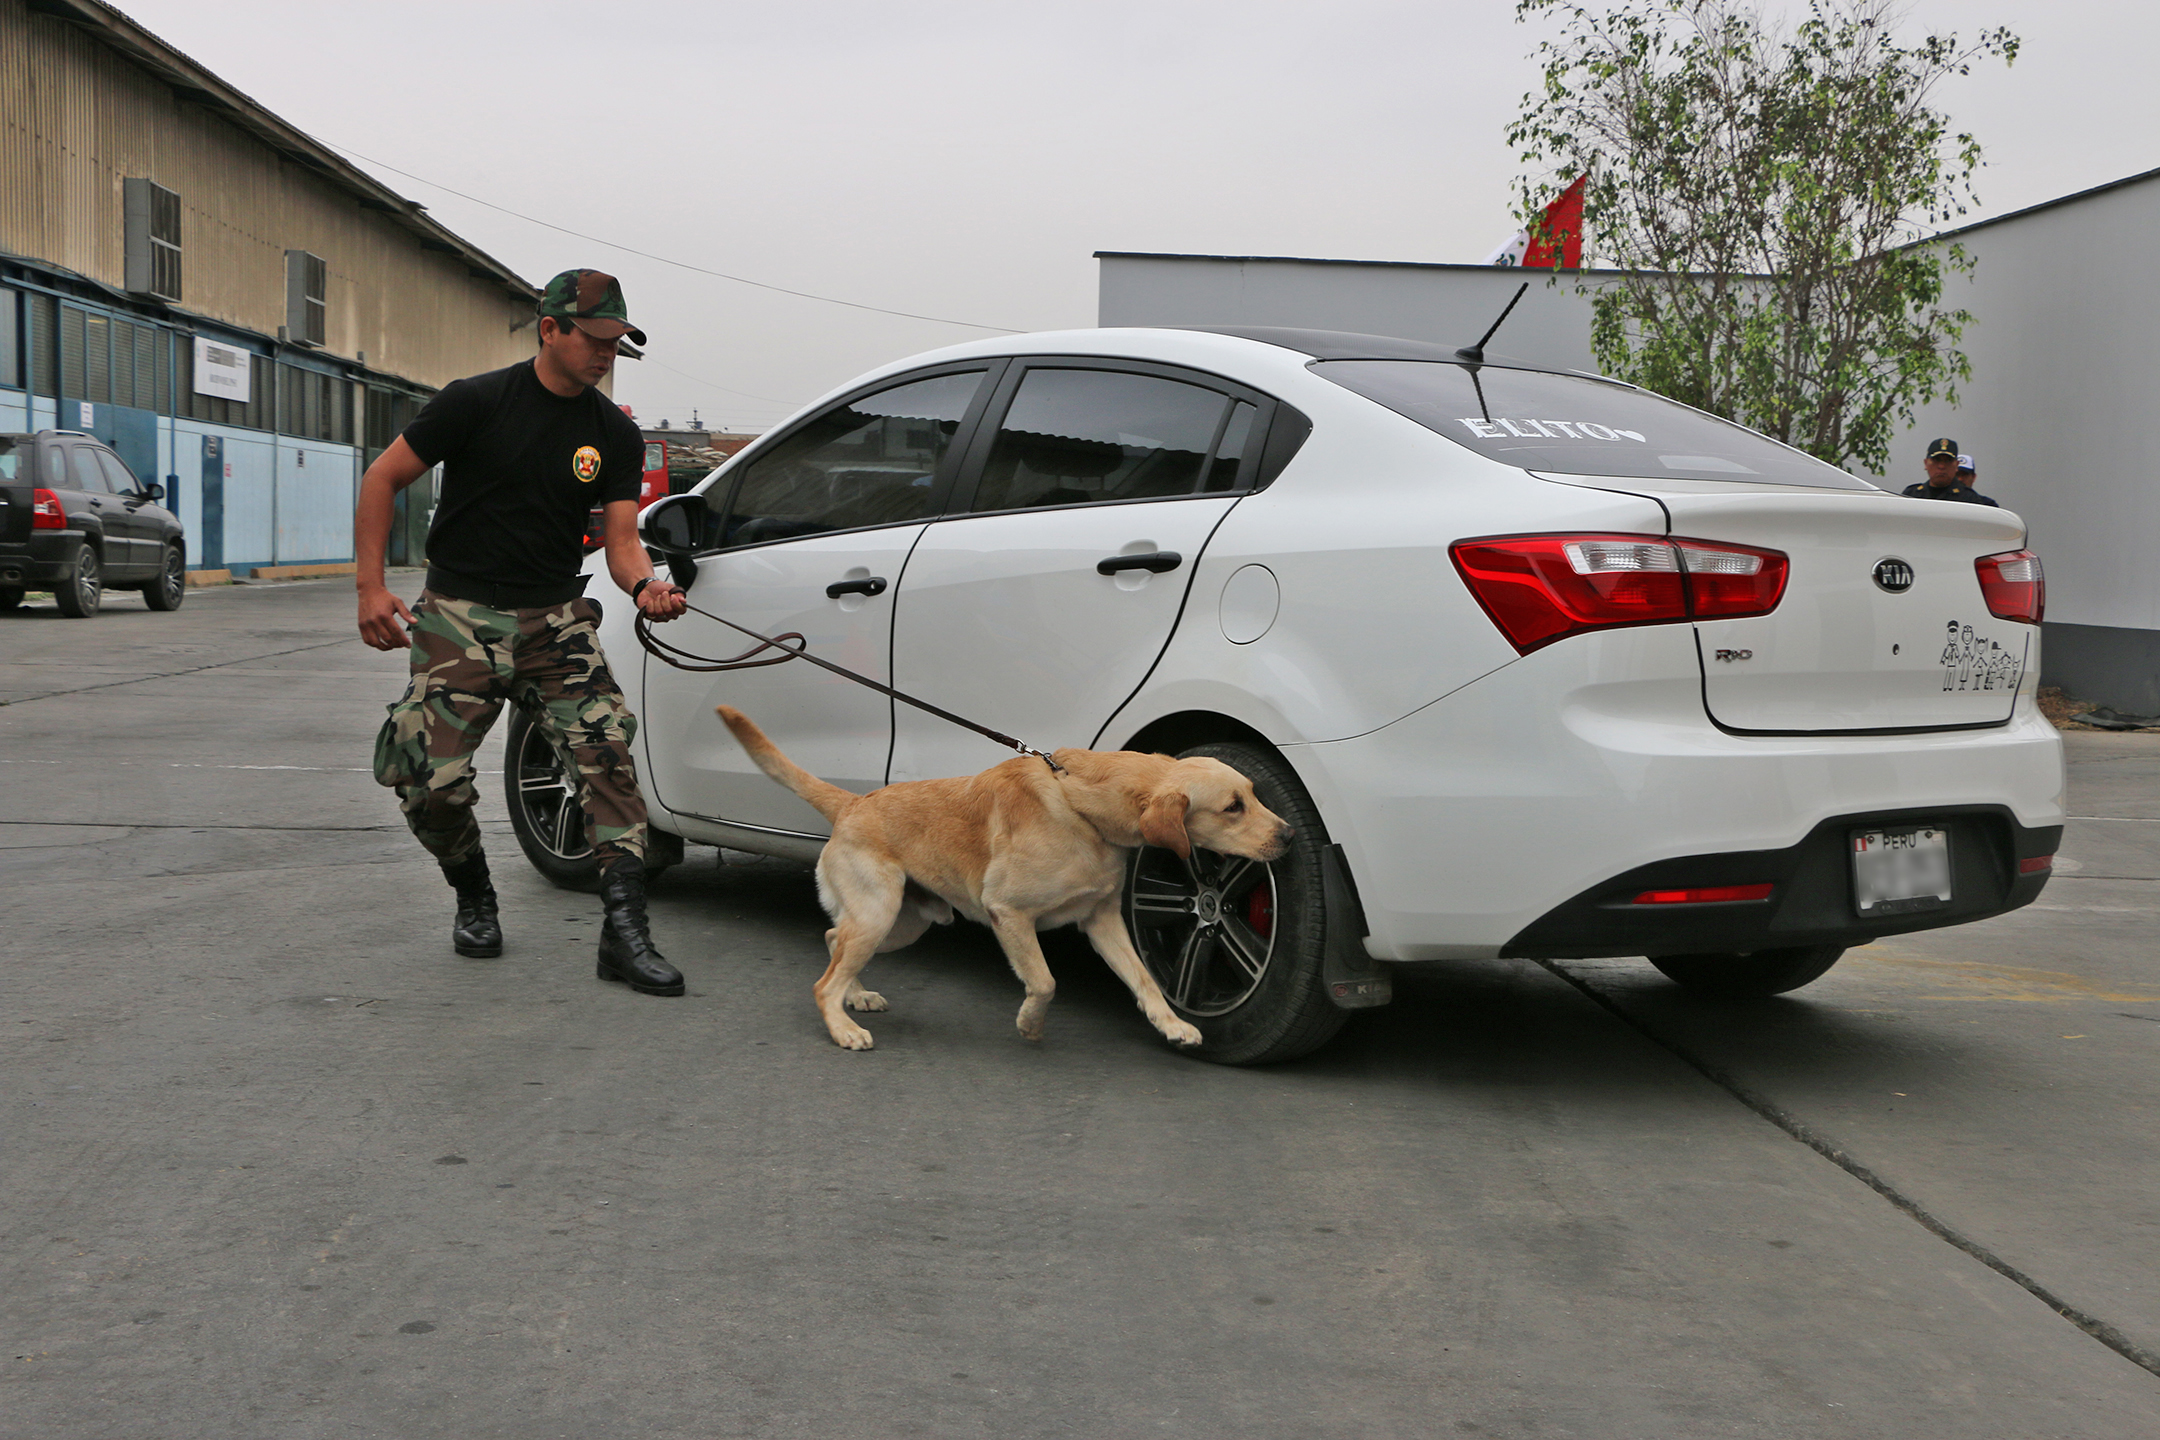 Photo of Peruvian K-9 handler following his dog while searching for illegal drugs in a vehicle